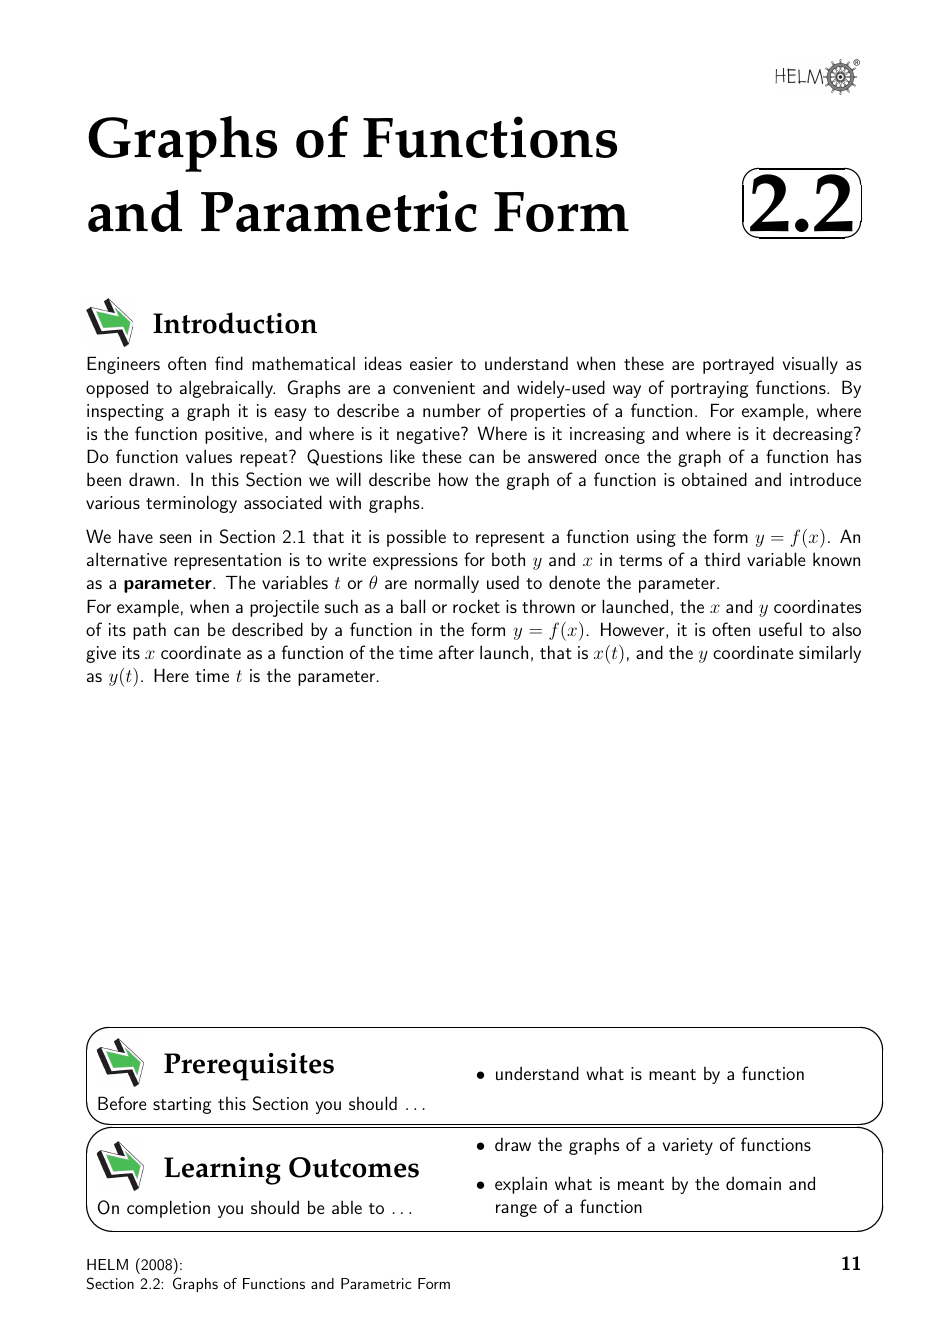 Helm Workbook Section 2.2: Graphs of Functions and Parametric Form, Page 1